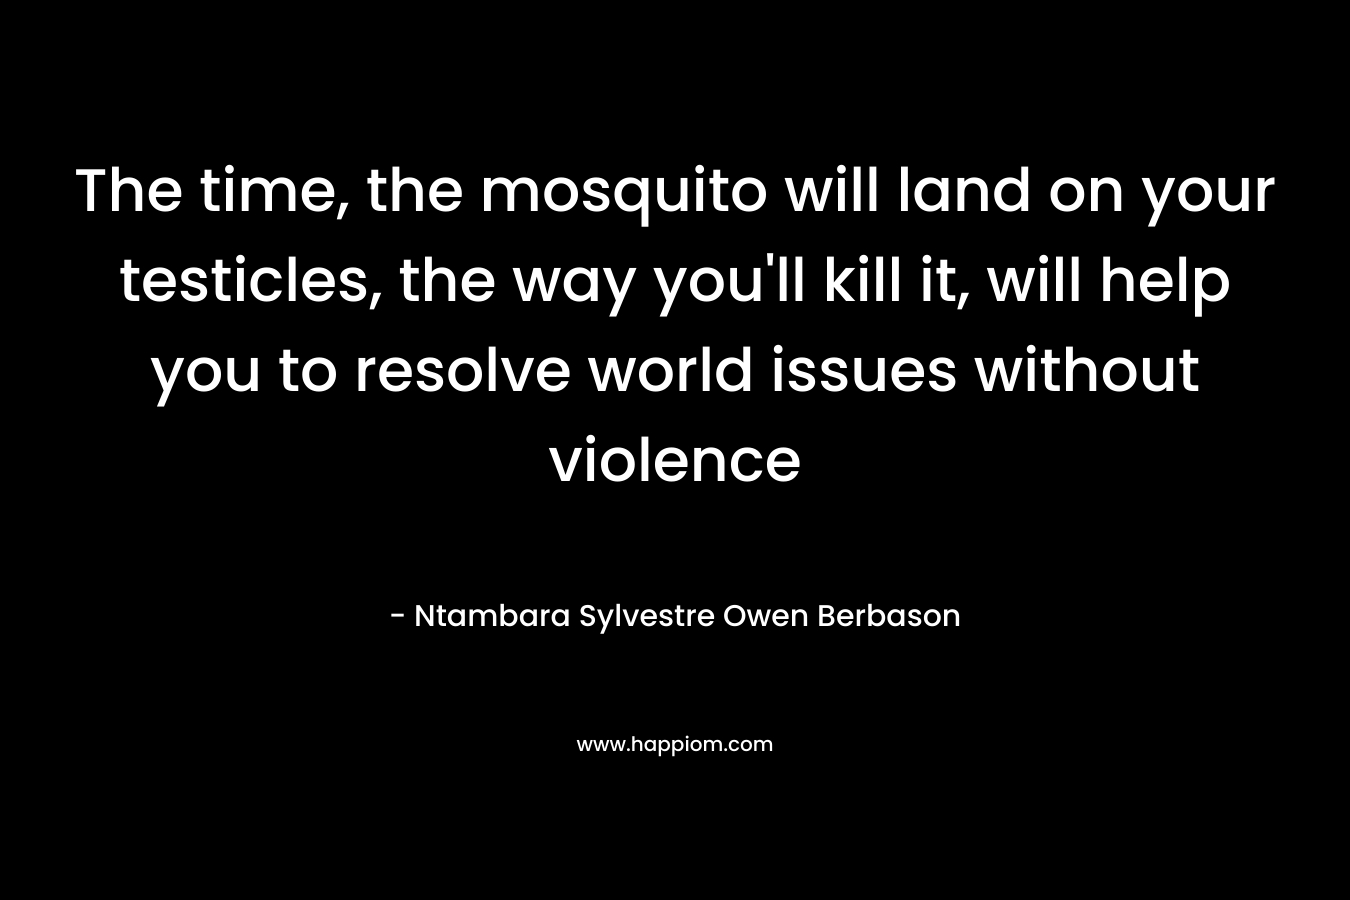 The time, the mosquito will land on your testicles, the way you’ll kill it, will help you to resolve world issues without violence – Ntambara Sylvestre Owen Berbason